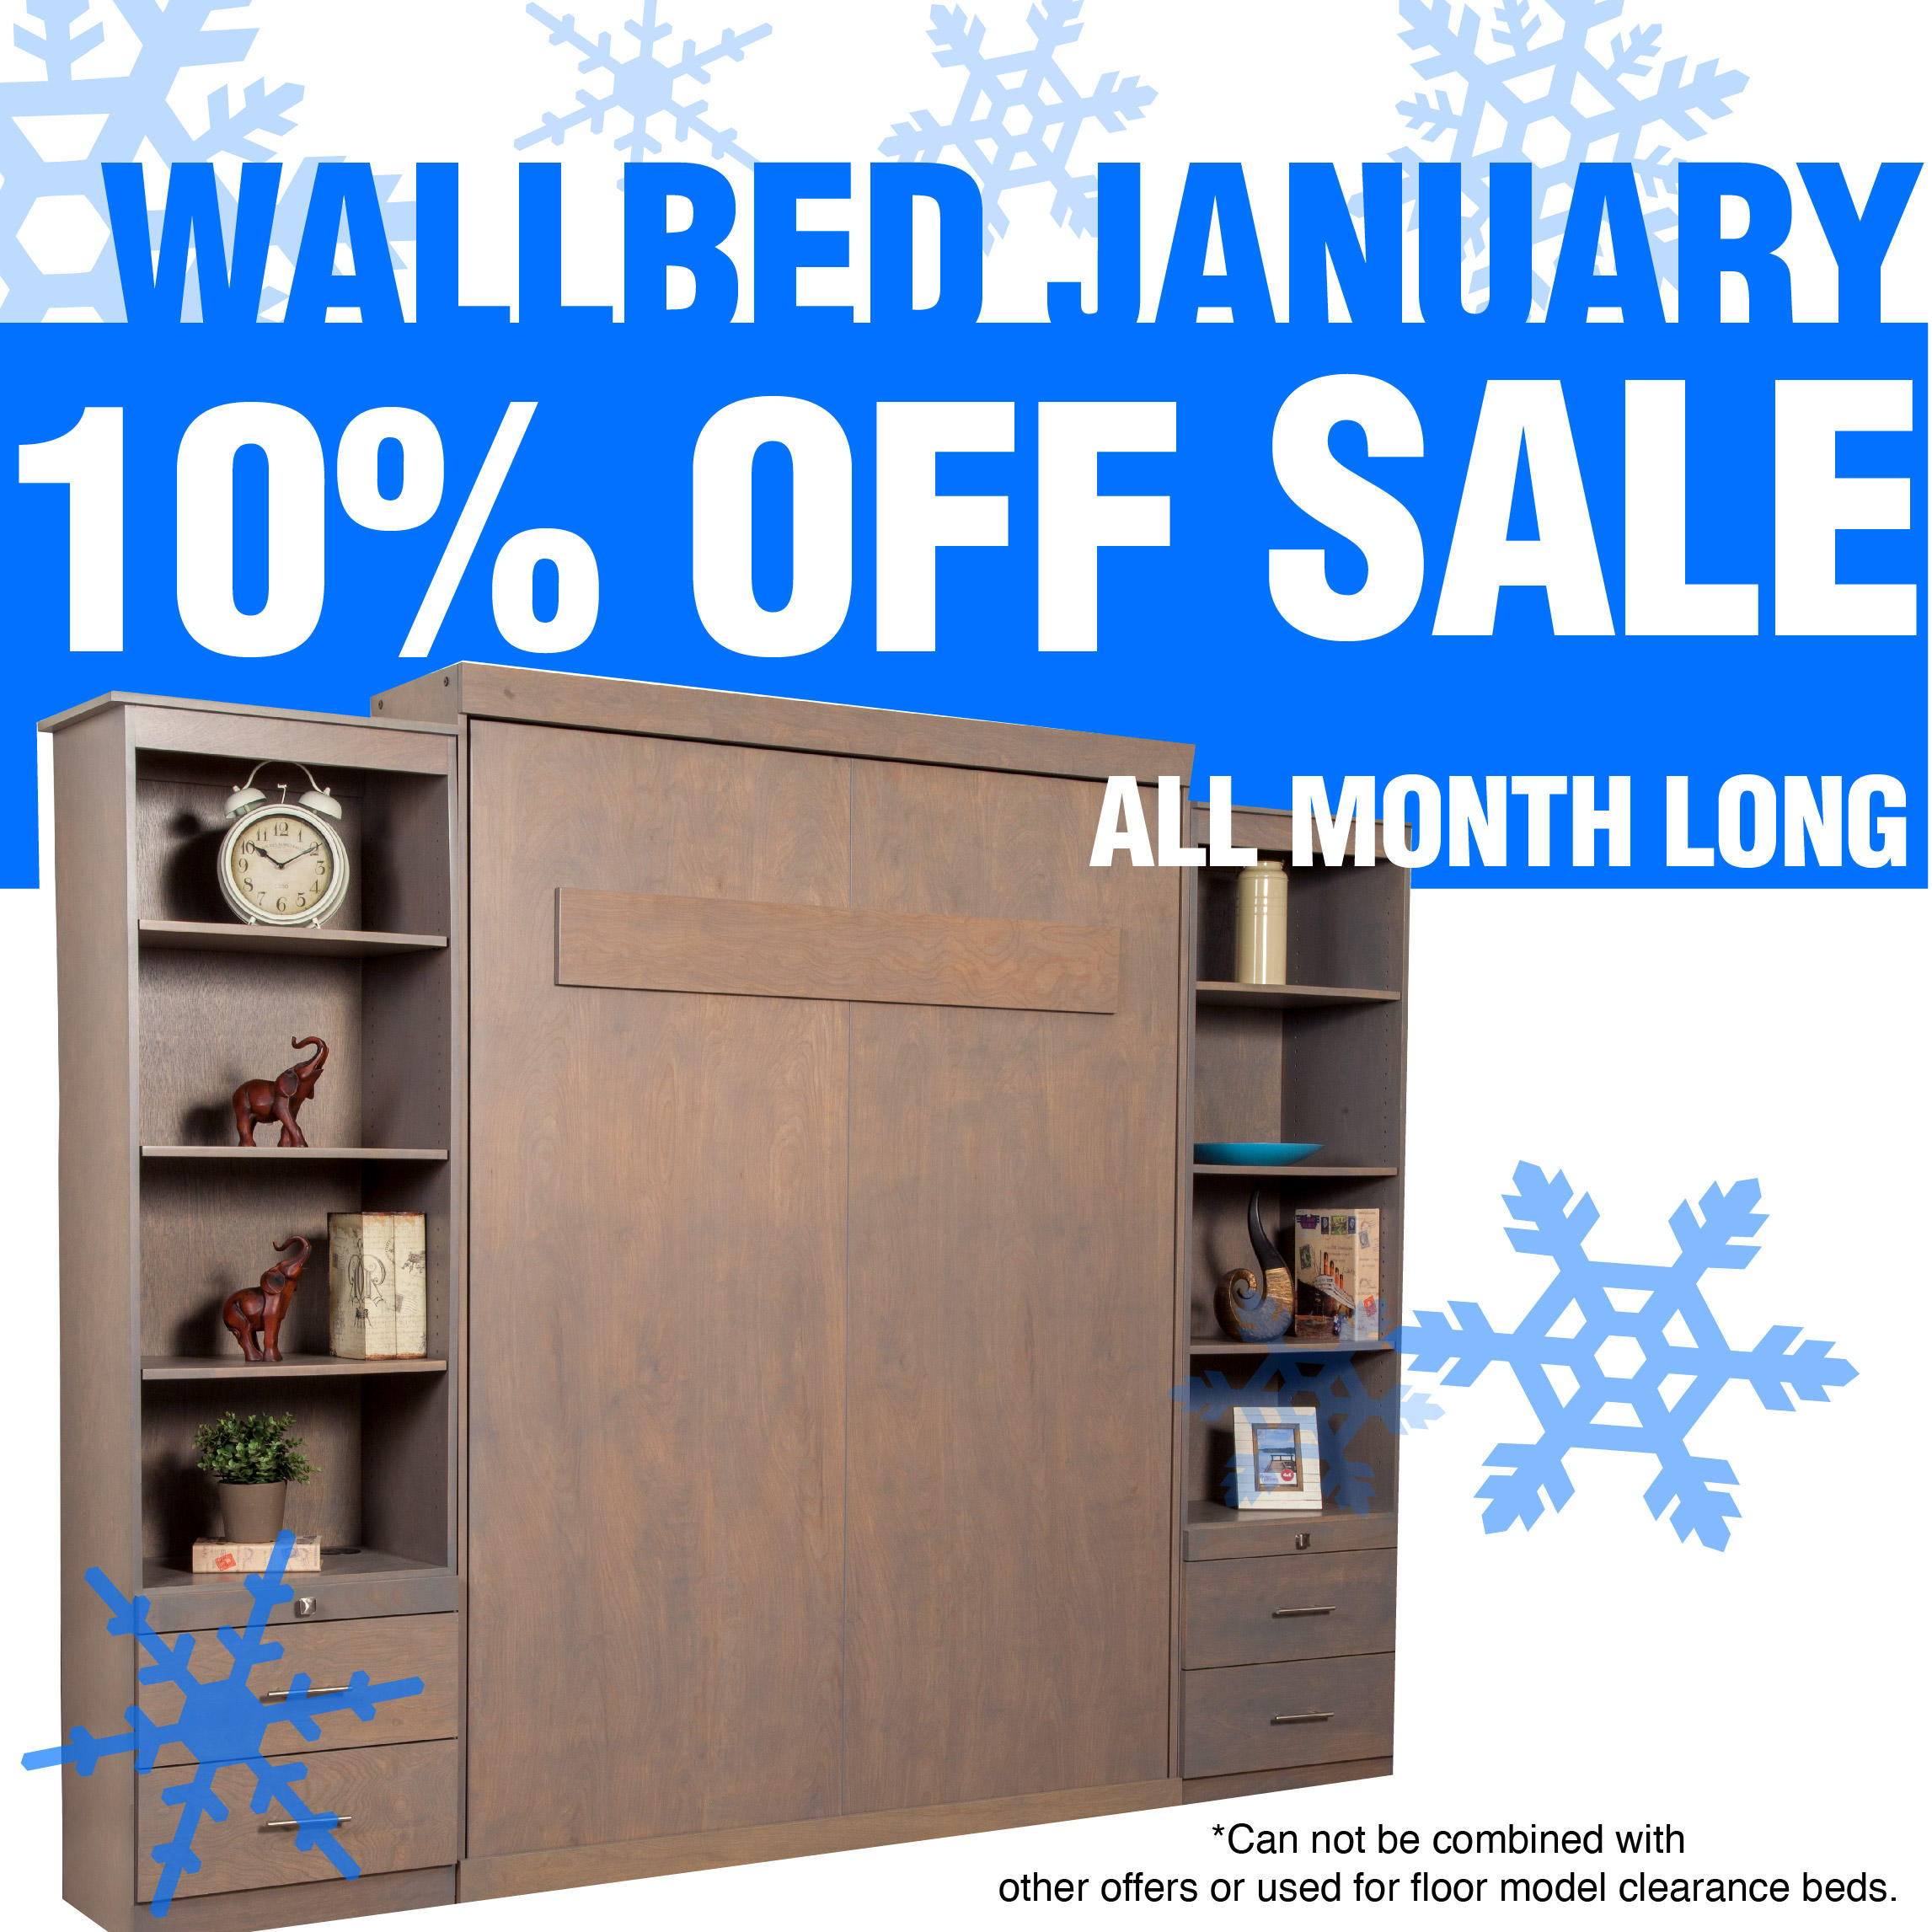 Save 10% on All Wall beds and Murphy Beds. Call or come visit our Showroom.
Offer ends January 31, 2023